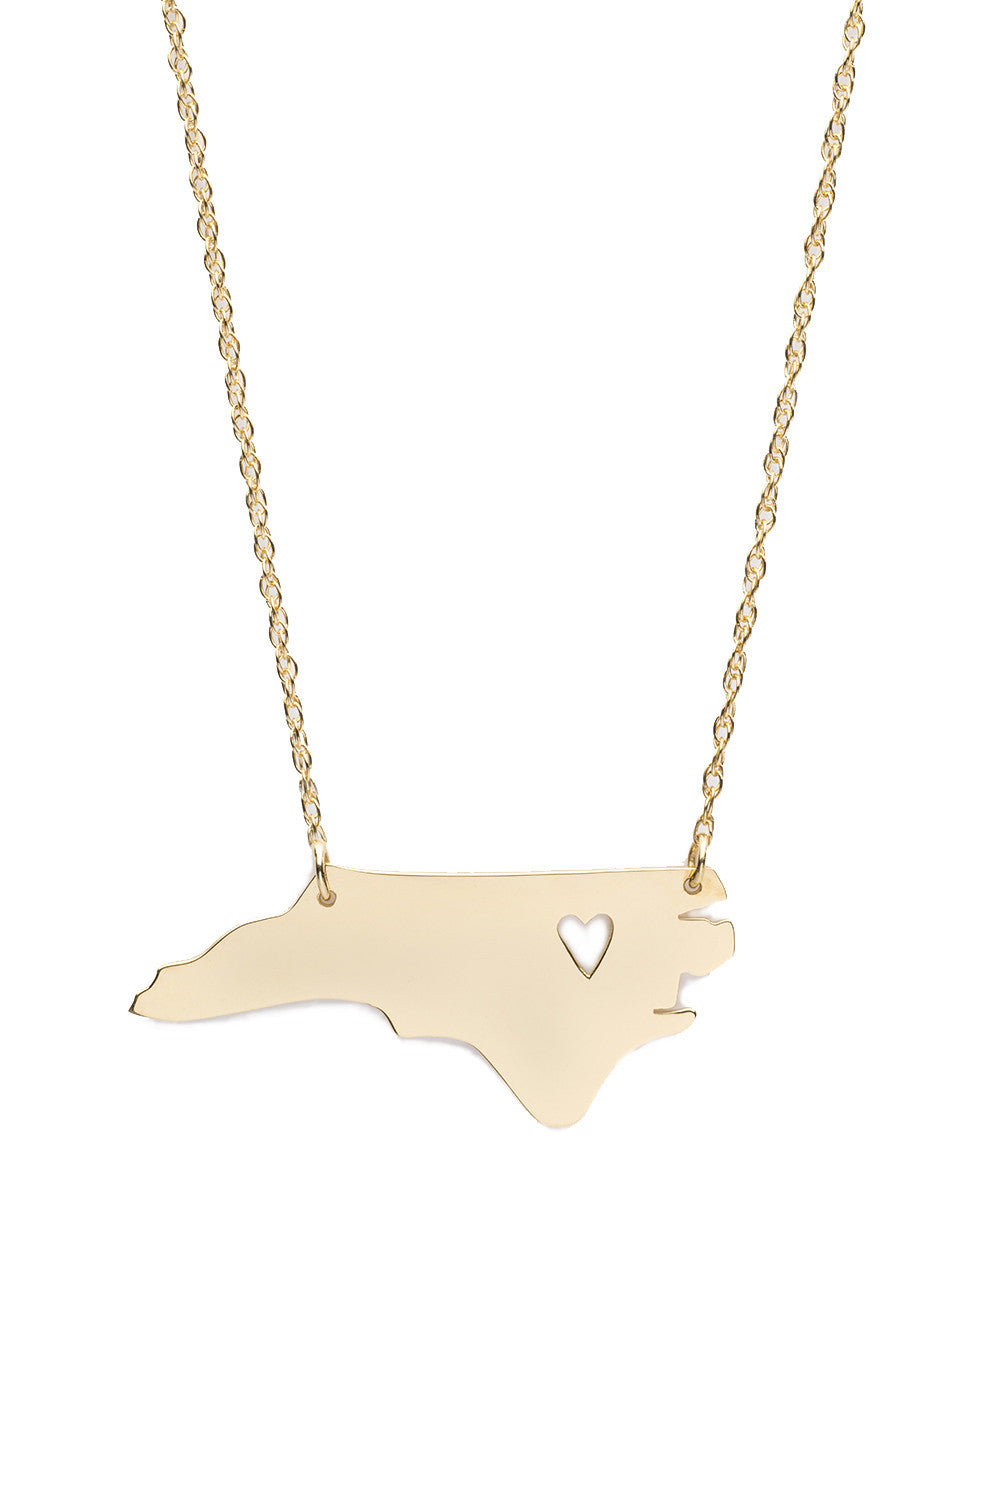 I found this at #moonandlola - Metal State Necklace